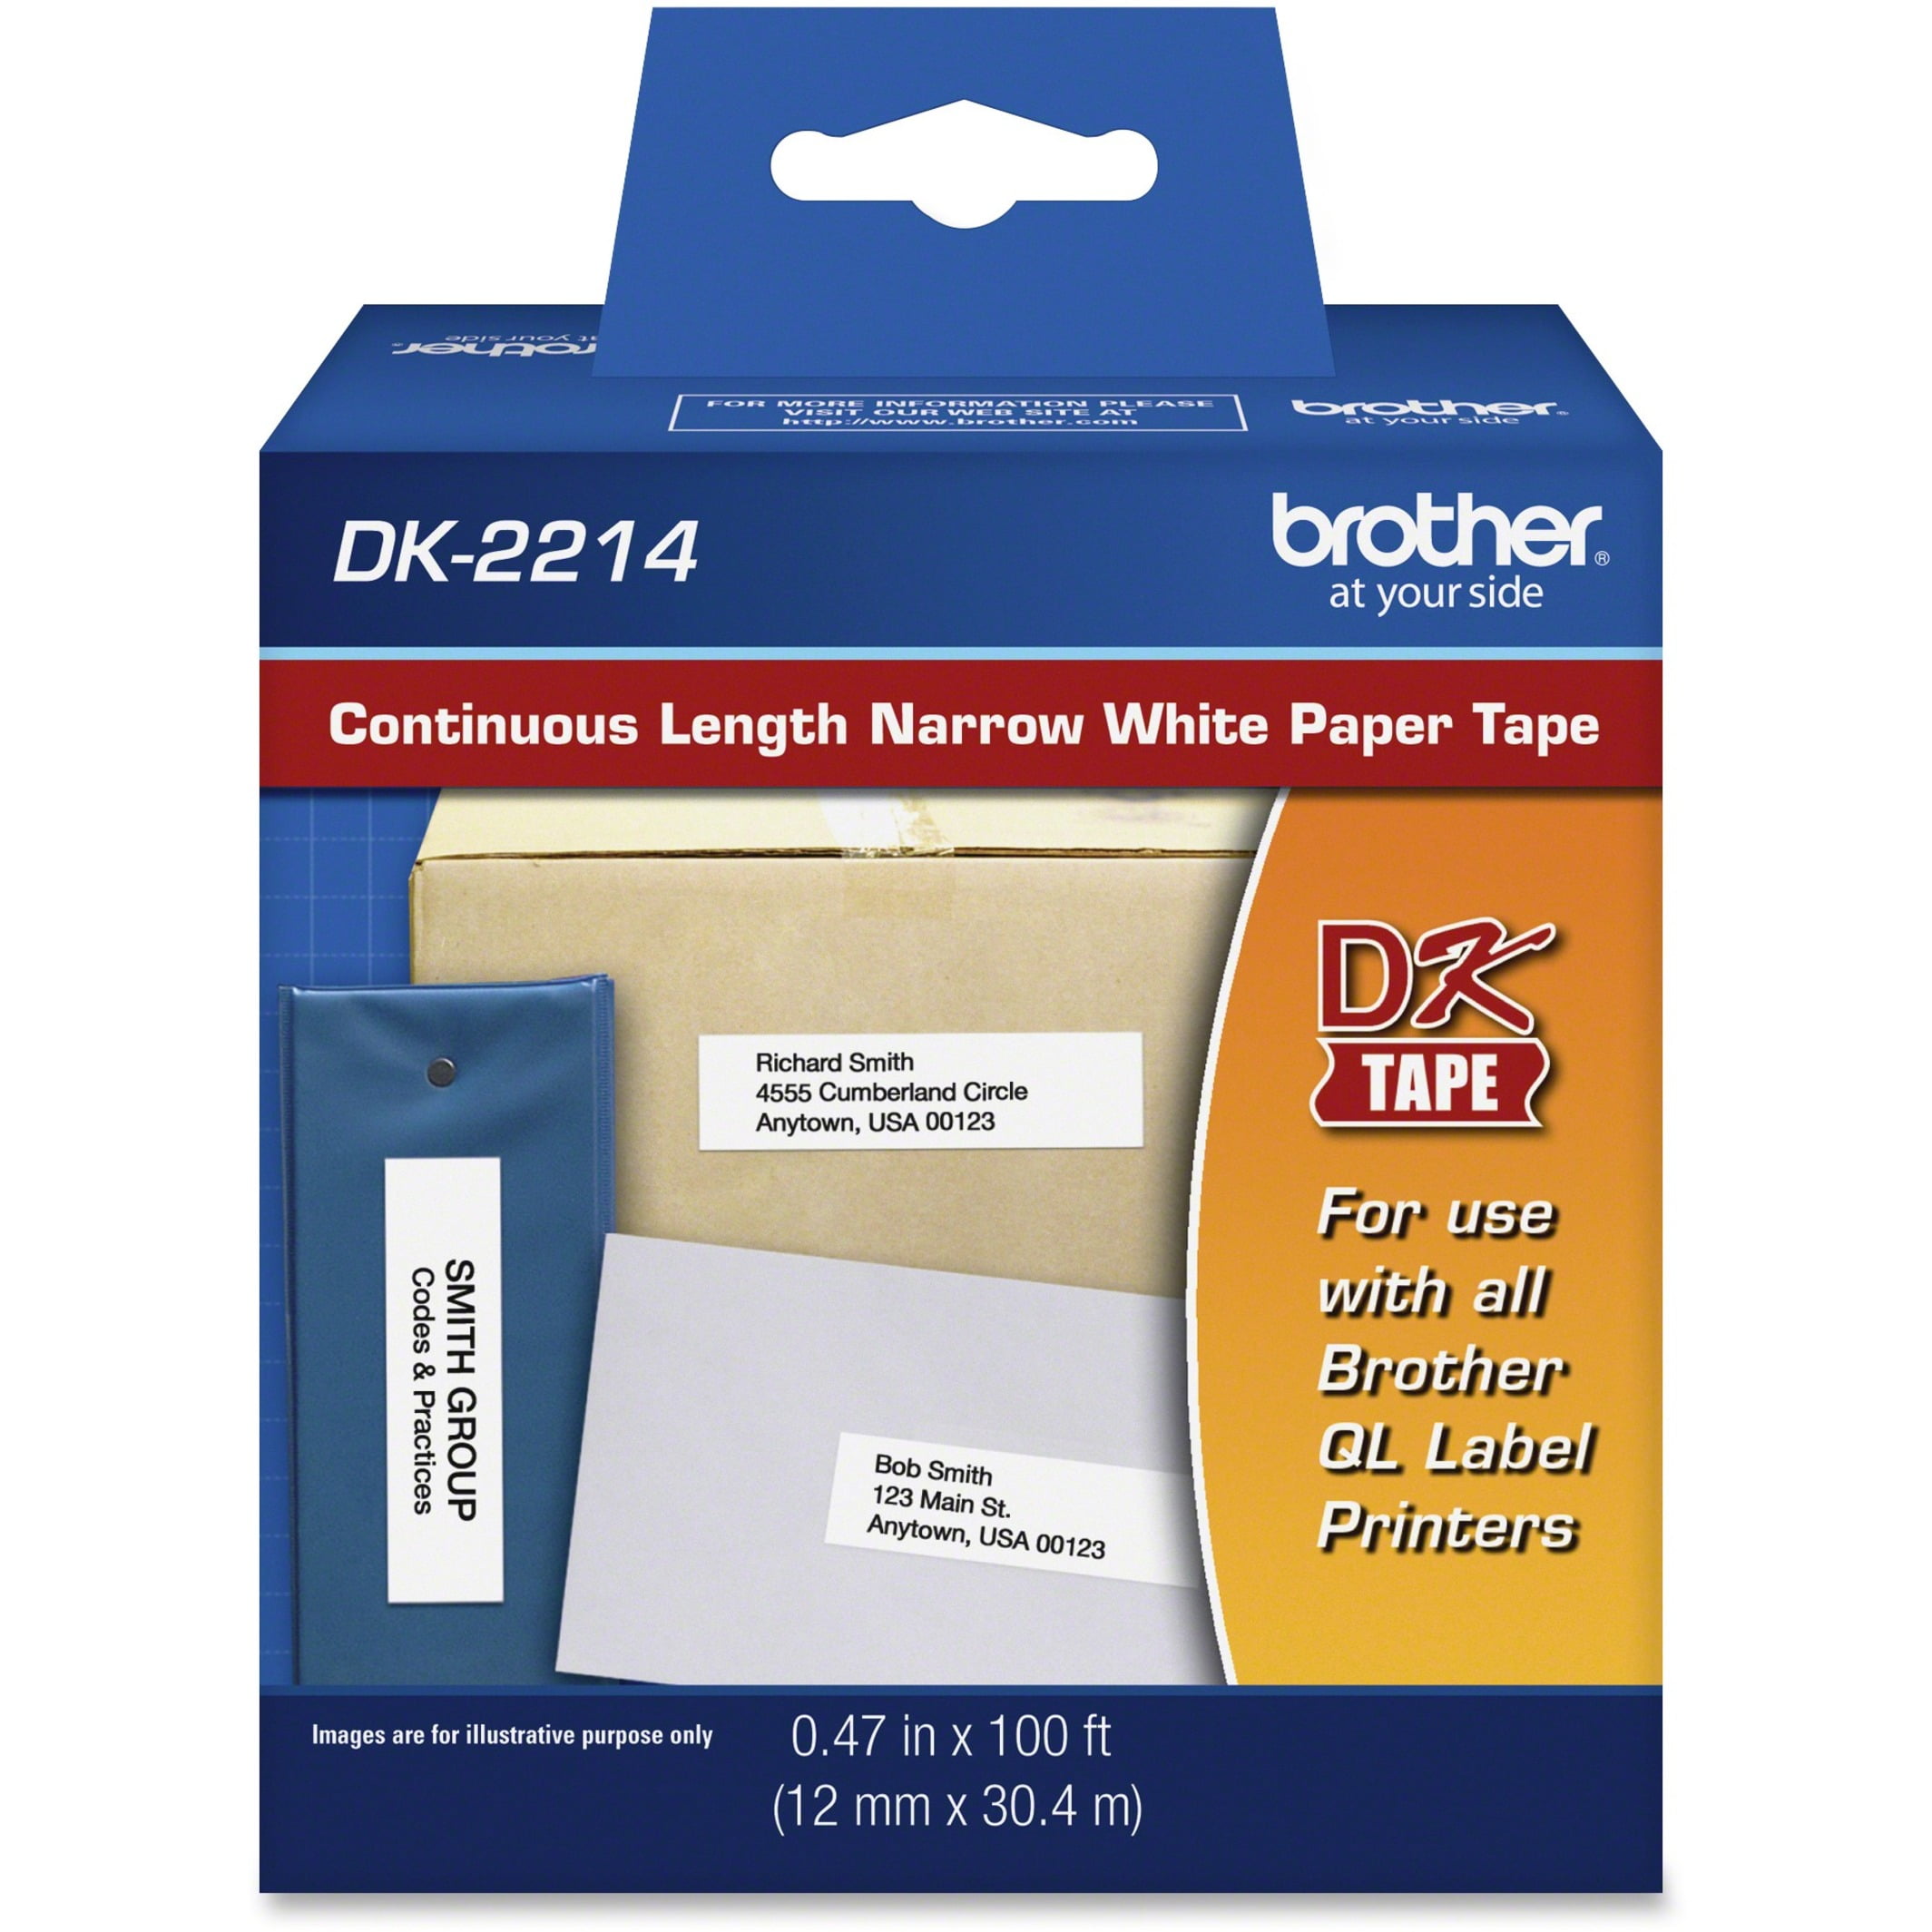 560172 - Write-On Label Tape, White, 1/2 Inch Roll